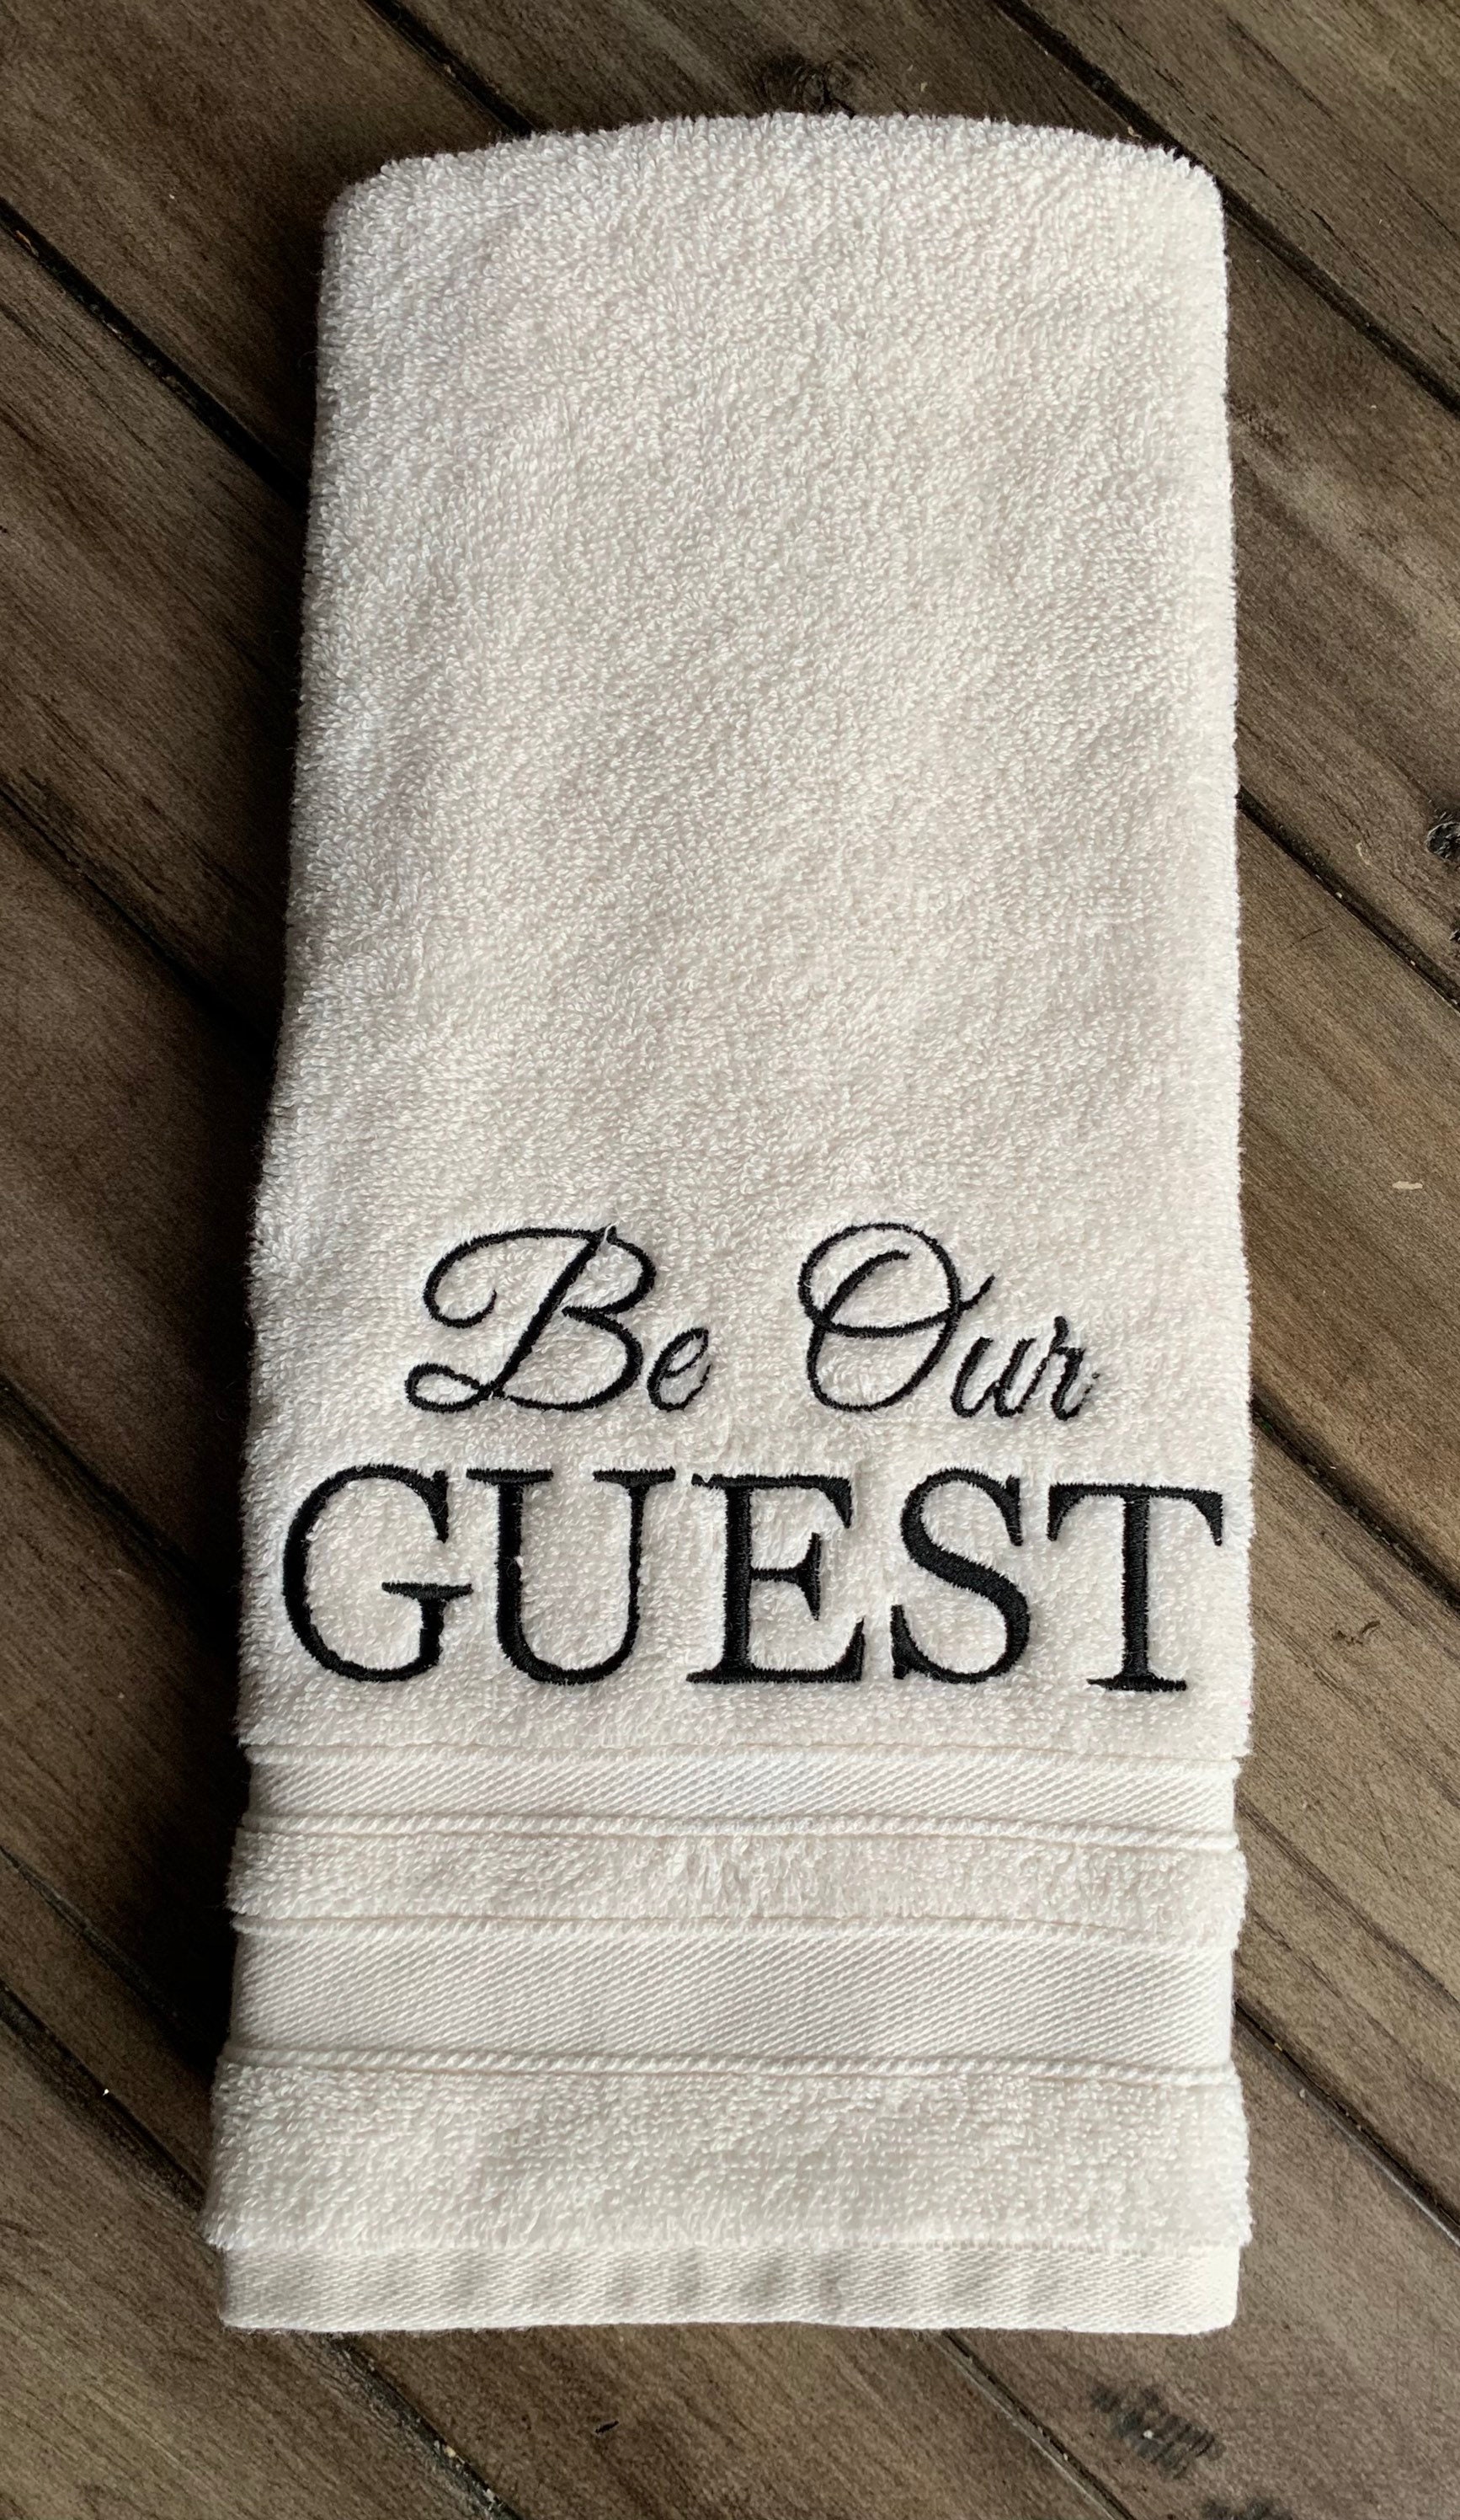 Be Our Guest Towel Set